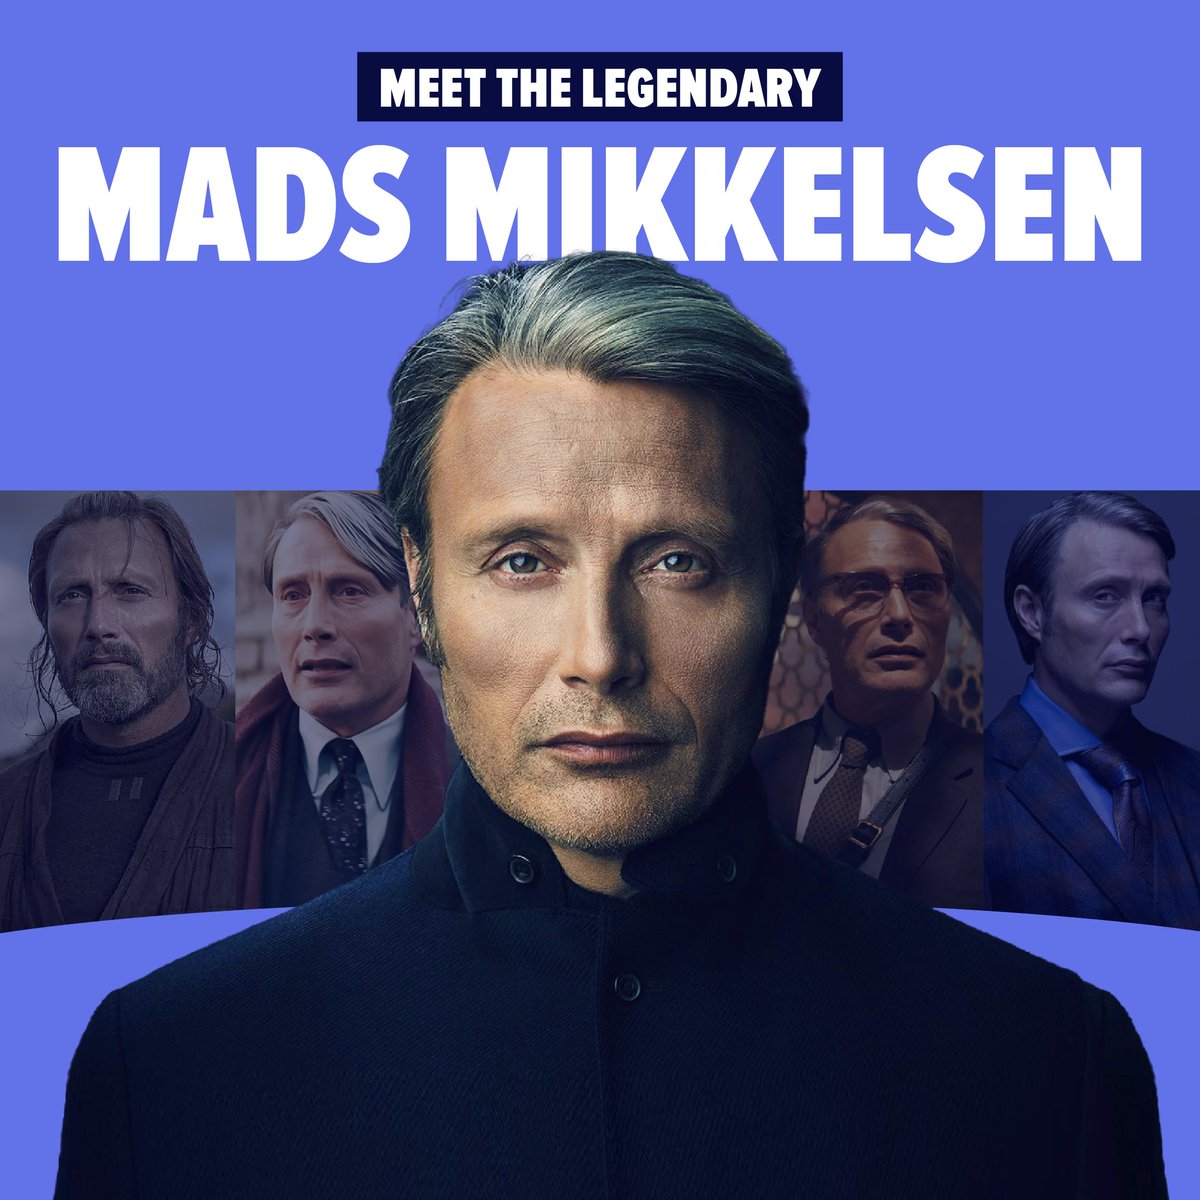 Dallas, we've got a positively delectable guest for you 🍽️ Dive into the mind of the masterful Mads Mikkelsen (Dr. Hannibal Lecter) from Hannibal this June at FAN EXPO. Get your tickets today: spr.ly/6010js5Xo #FANEXPODallas #dallas #texas #dfw #madsmikkelsen #hannibal